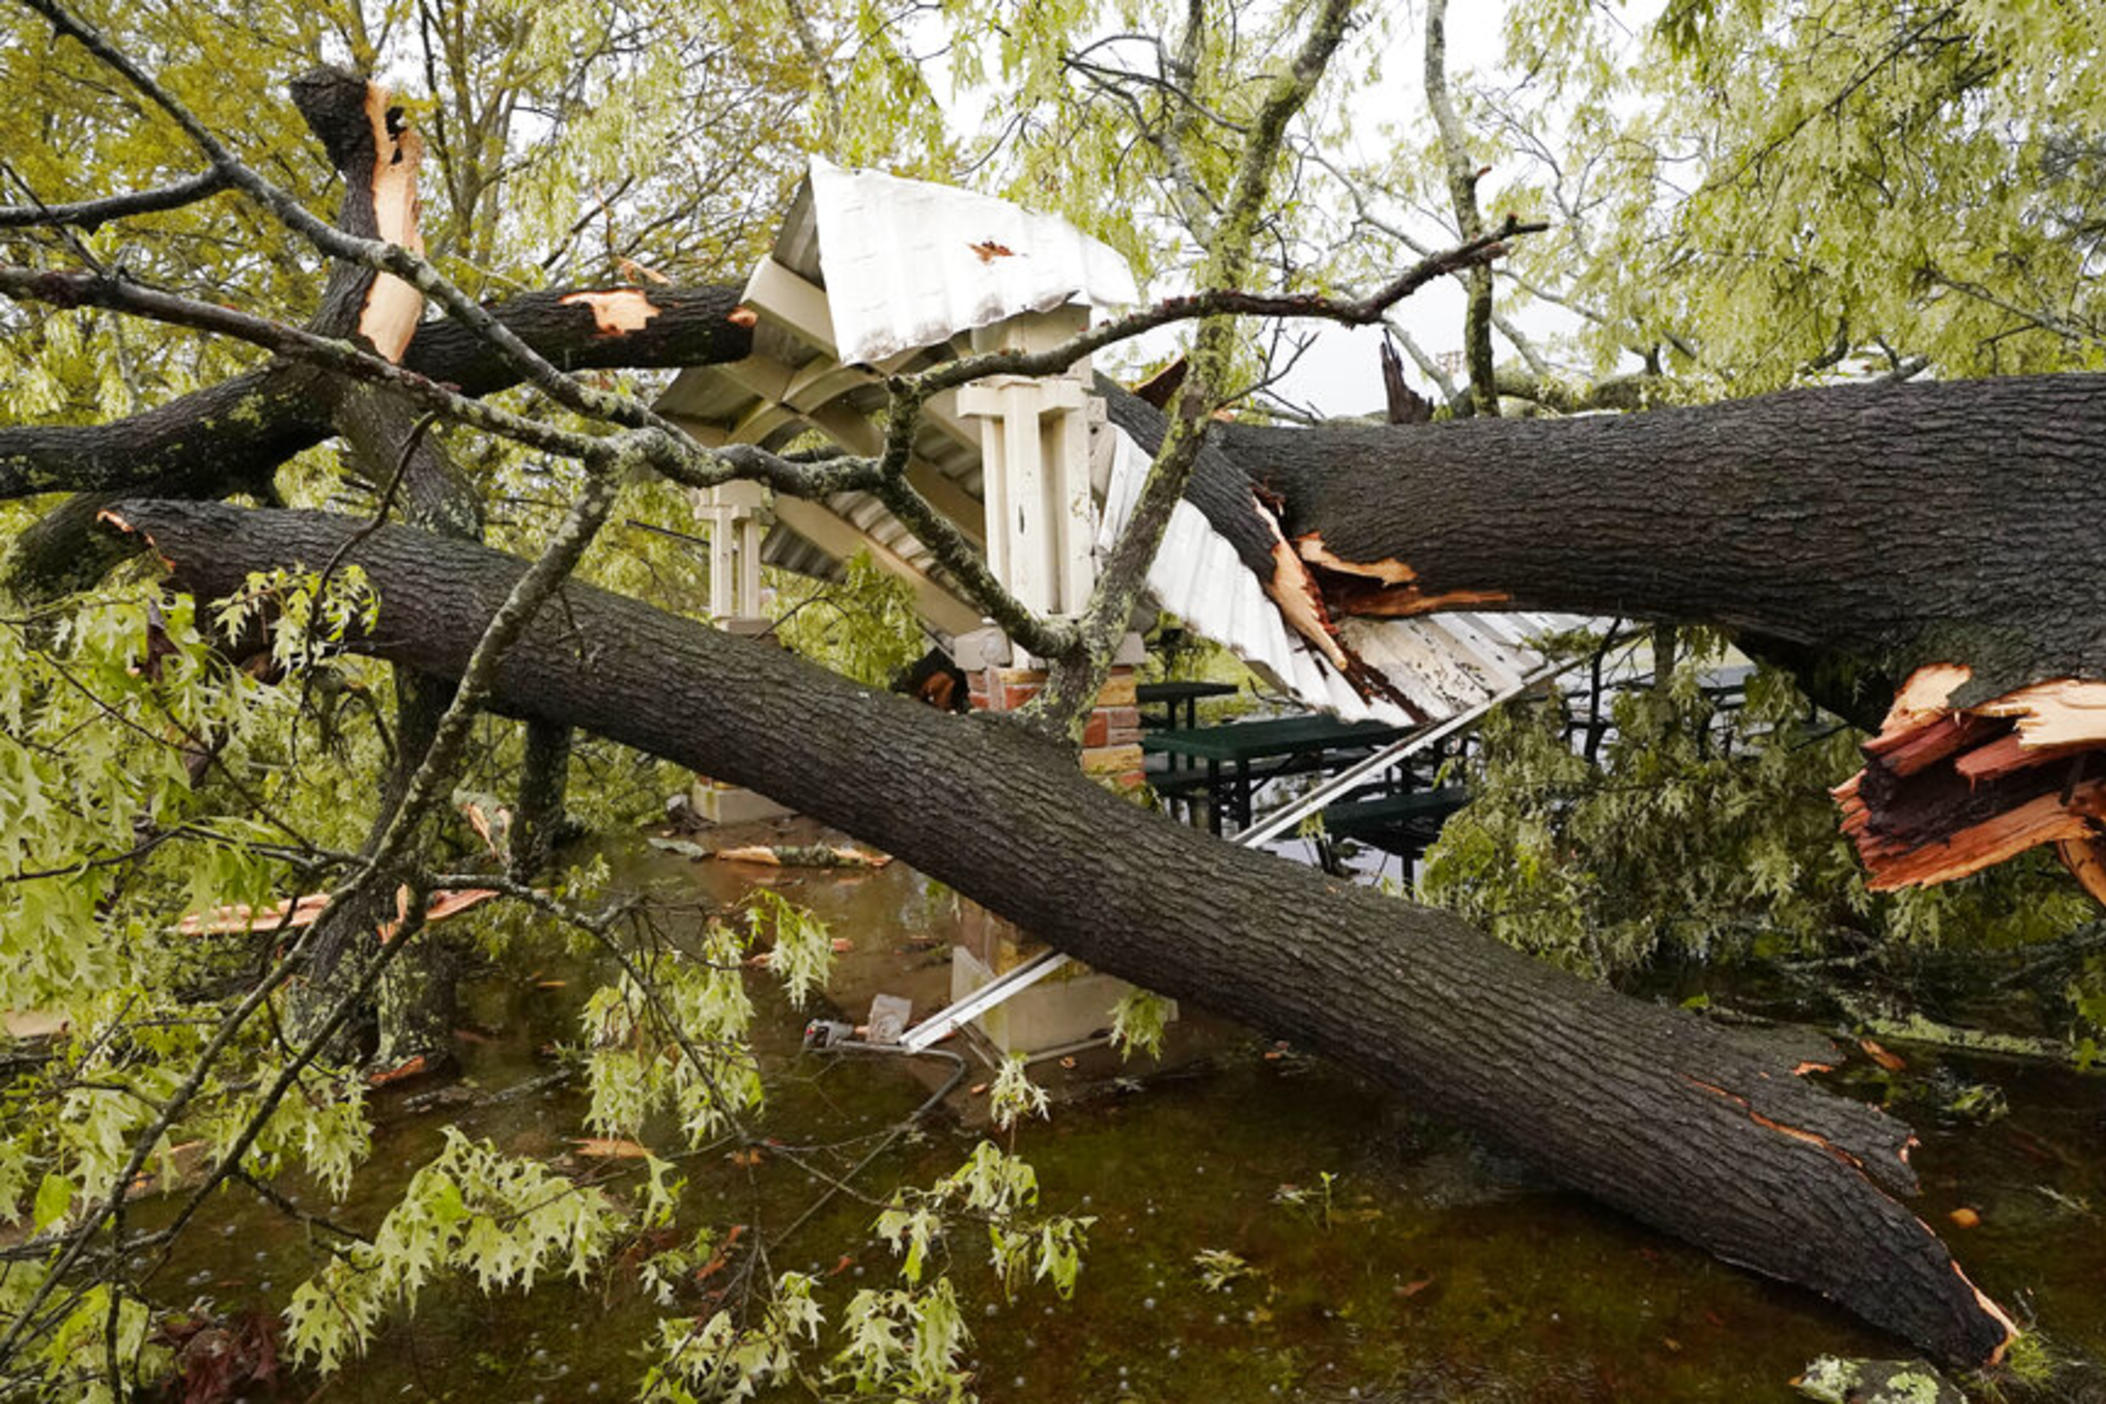 A tree toppled by the storm rests on the roof of a gazebo at Battlefield Park in Jackson, Miss., following a severe weather outbreak in the state, Wednesday, March 30, 2022. About a dozen trees were felled by the storm in the park.